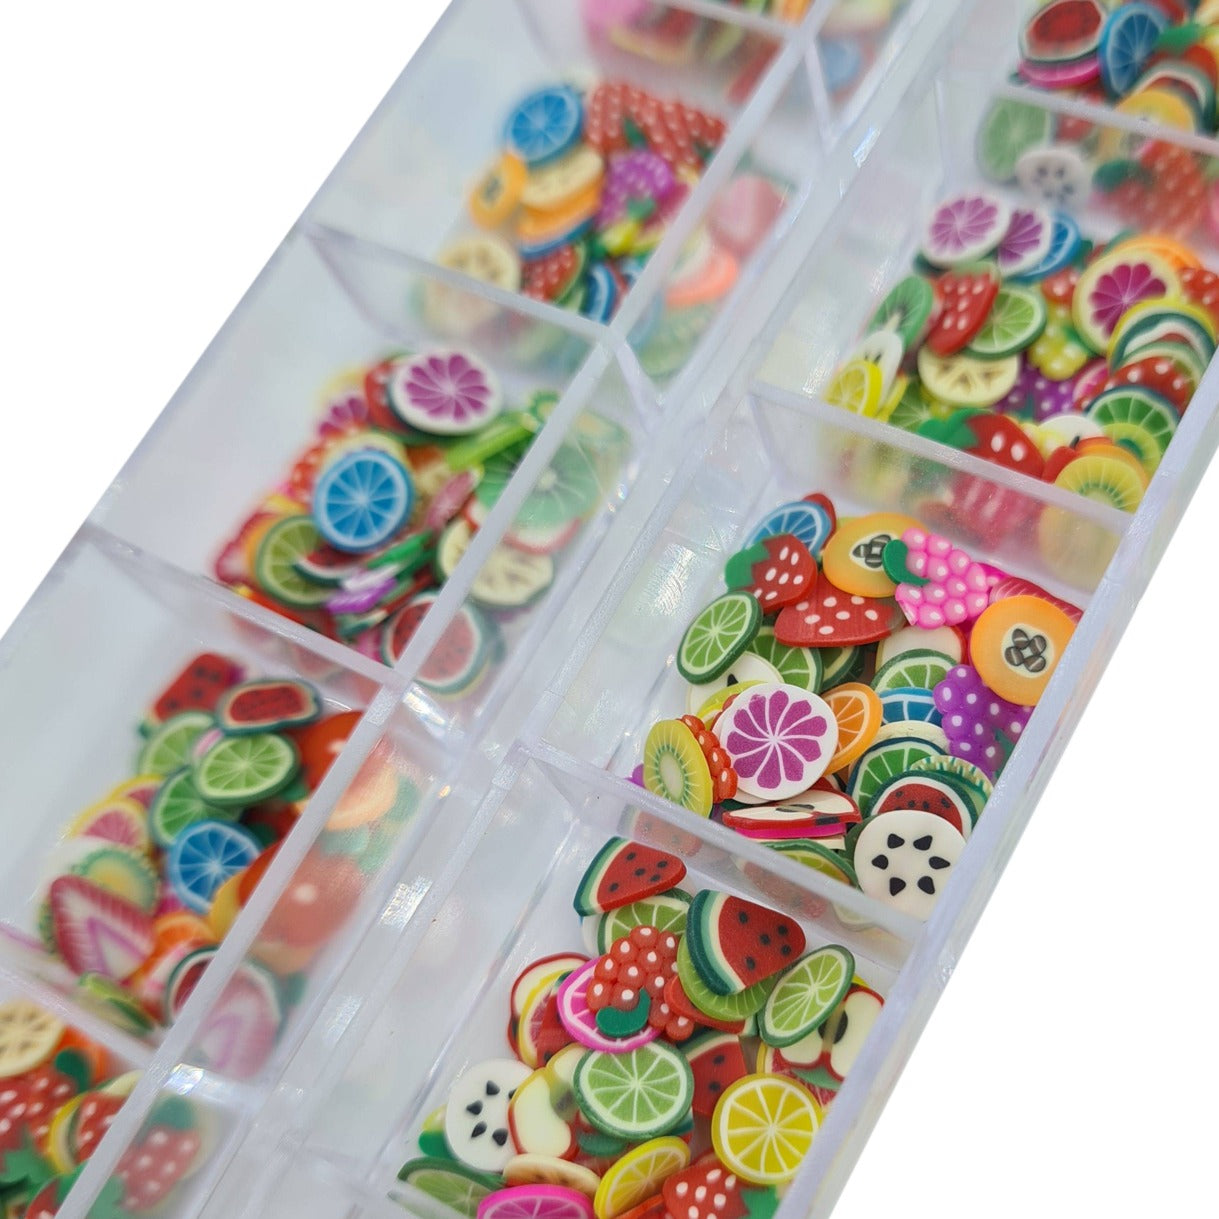 2 Boxes Fruit Flower Slices Nail Art Slices, 3D Polymer Clay Mini Slices  Resin Making Charms Colorful Nail Art Supplies for DIY Crafts Lip Gloss  Cellphone Decoration(Fruit Flower) : Amazon.in: Beauty